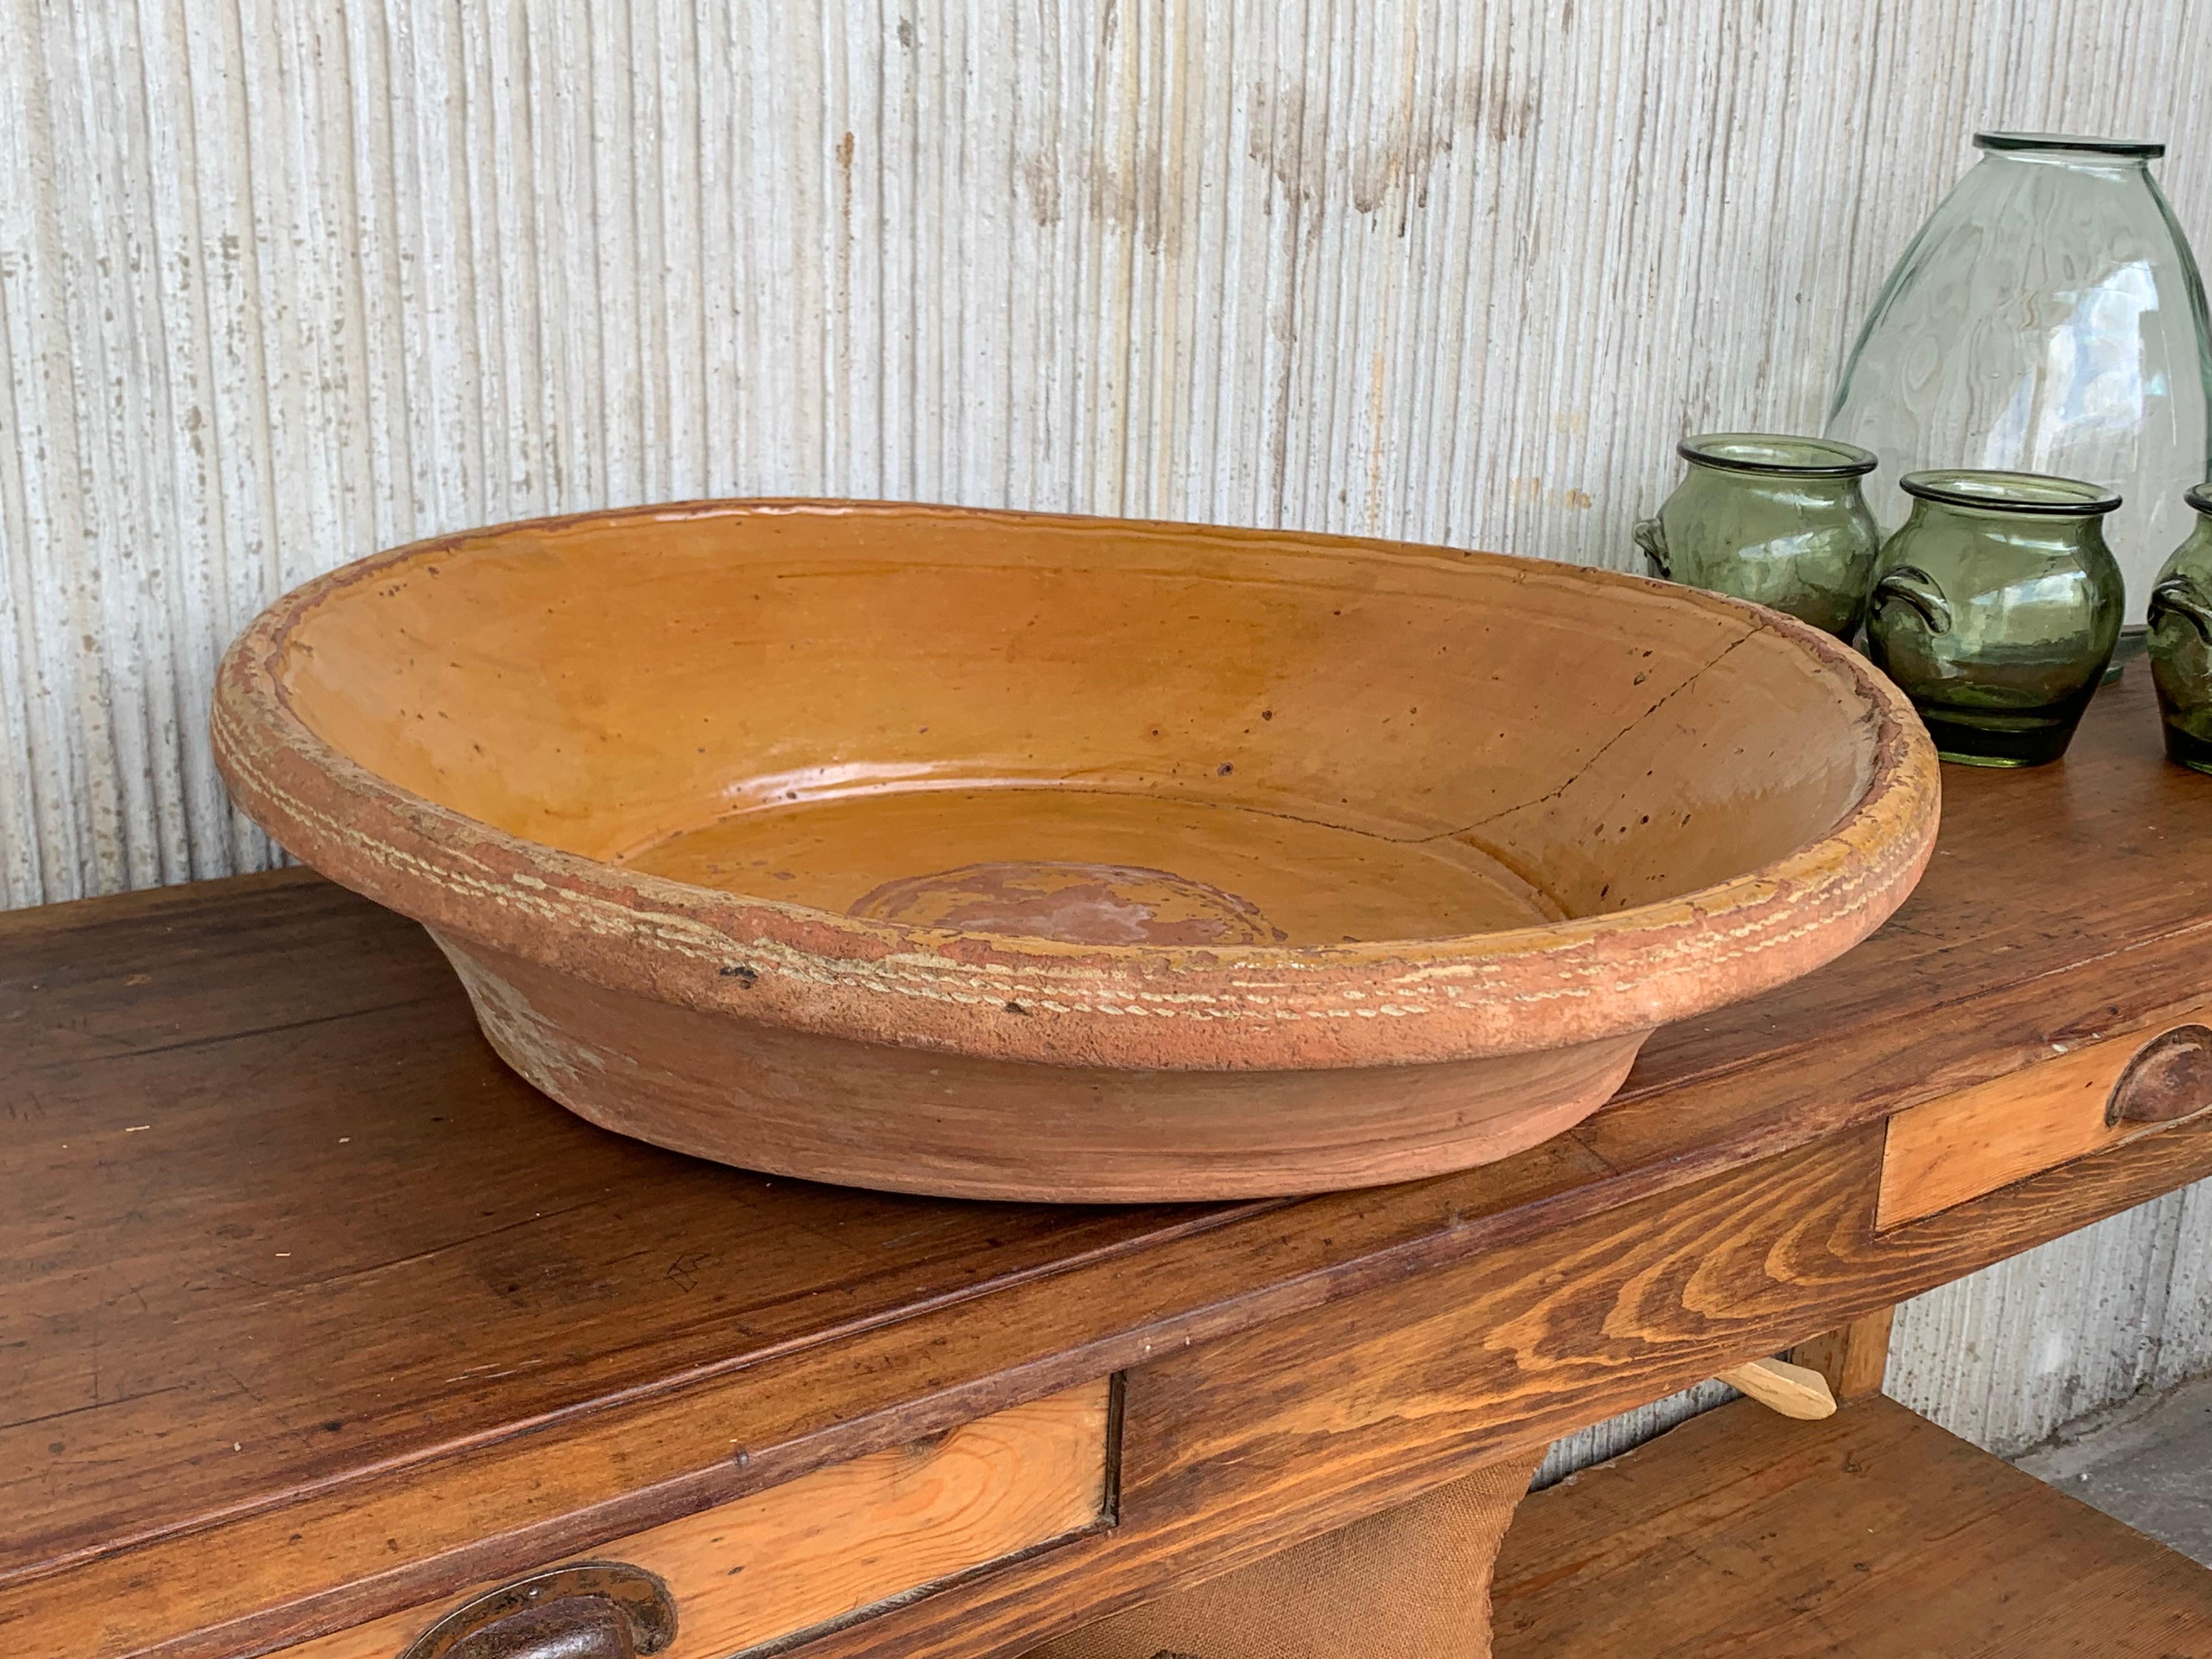 Hand-Woven 19th Century Spanish Hand Thrown and Glazed Mustard Brown Stoneware Pottery Bowl For Sale